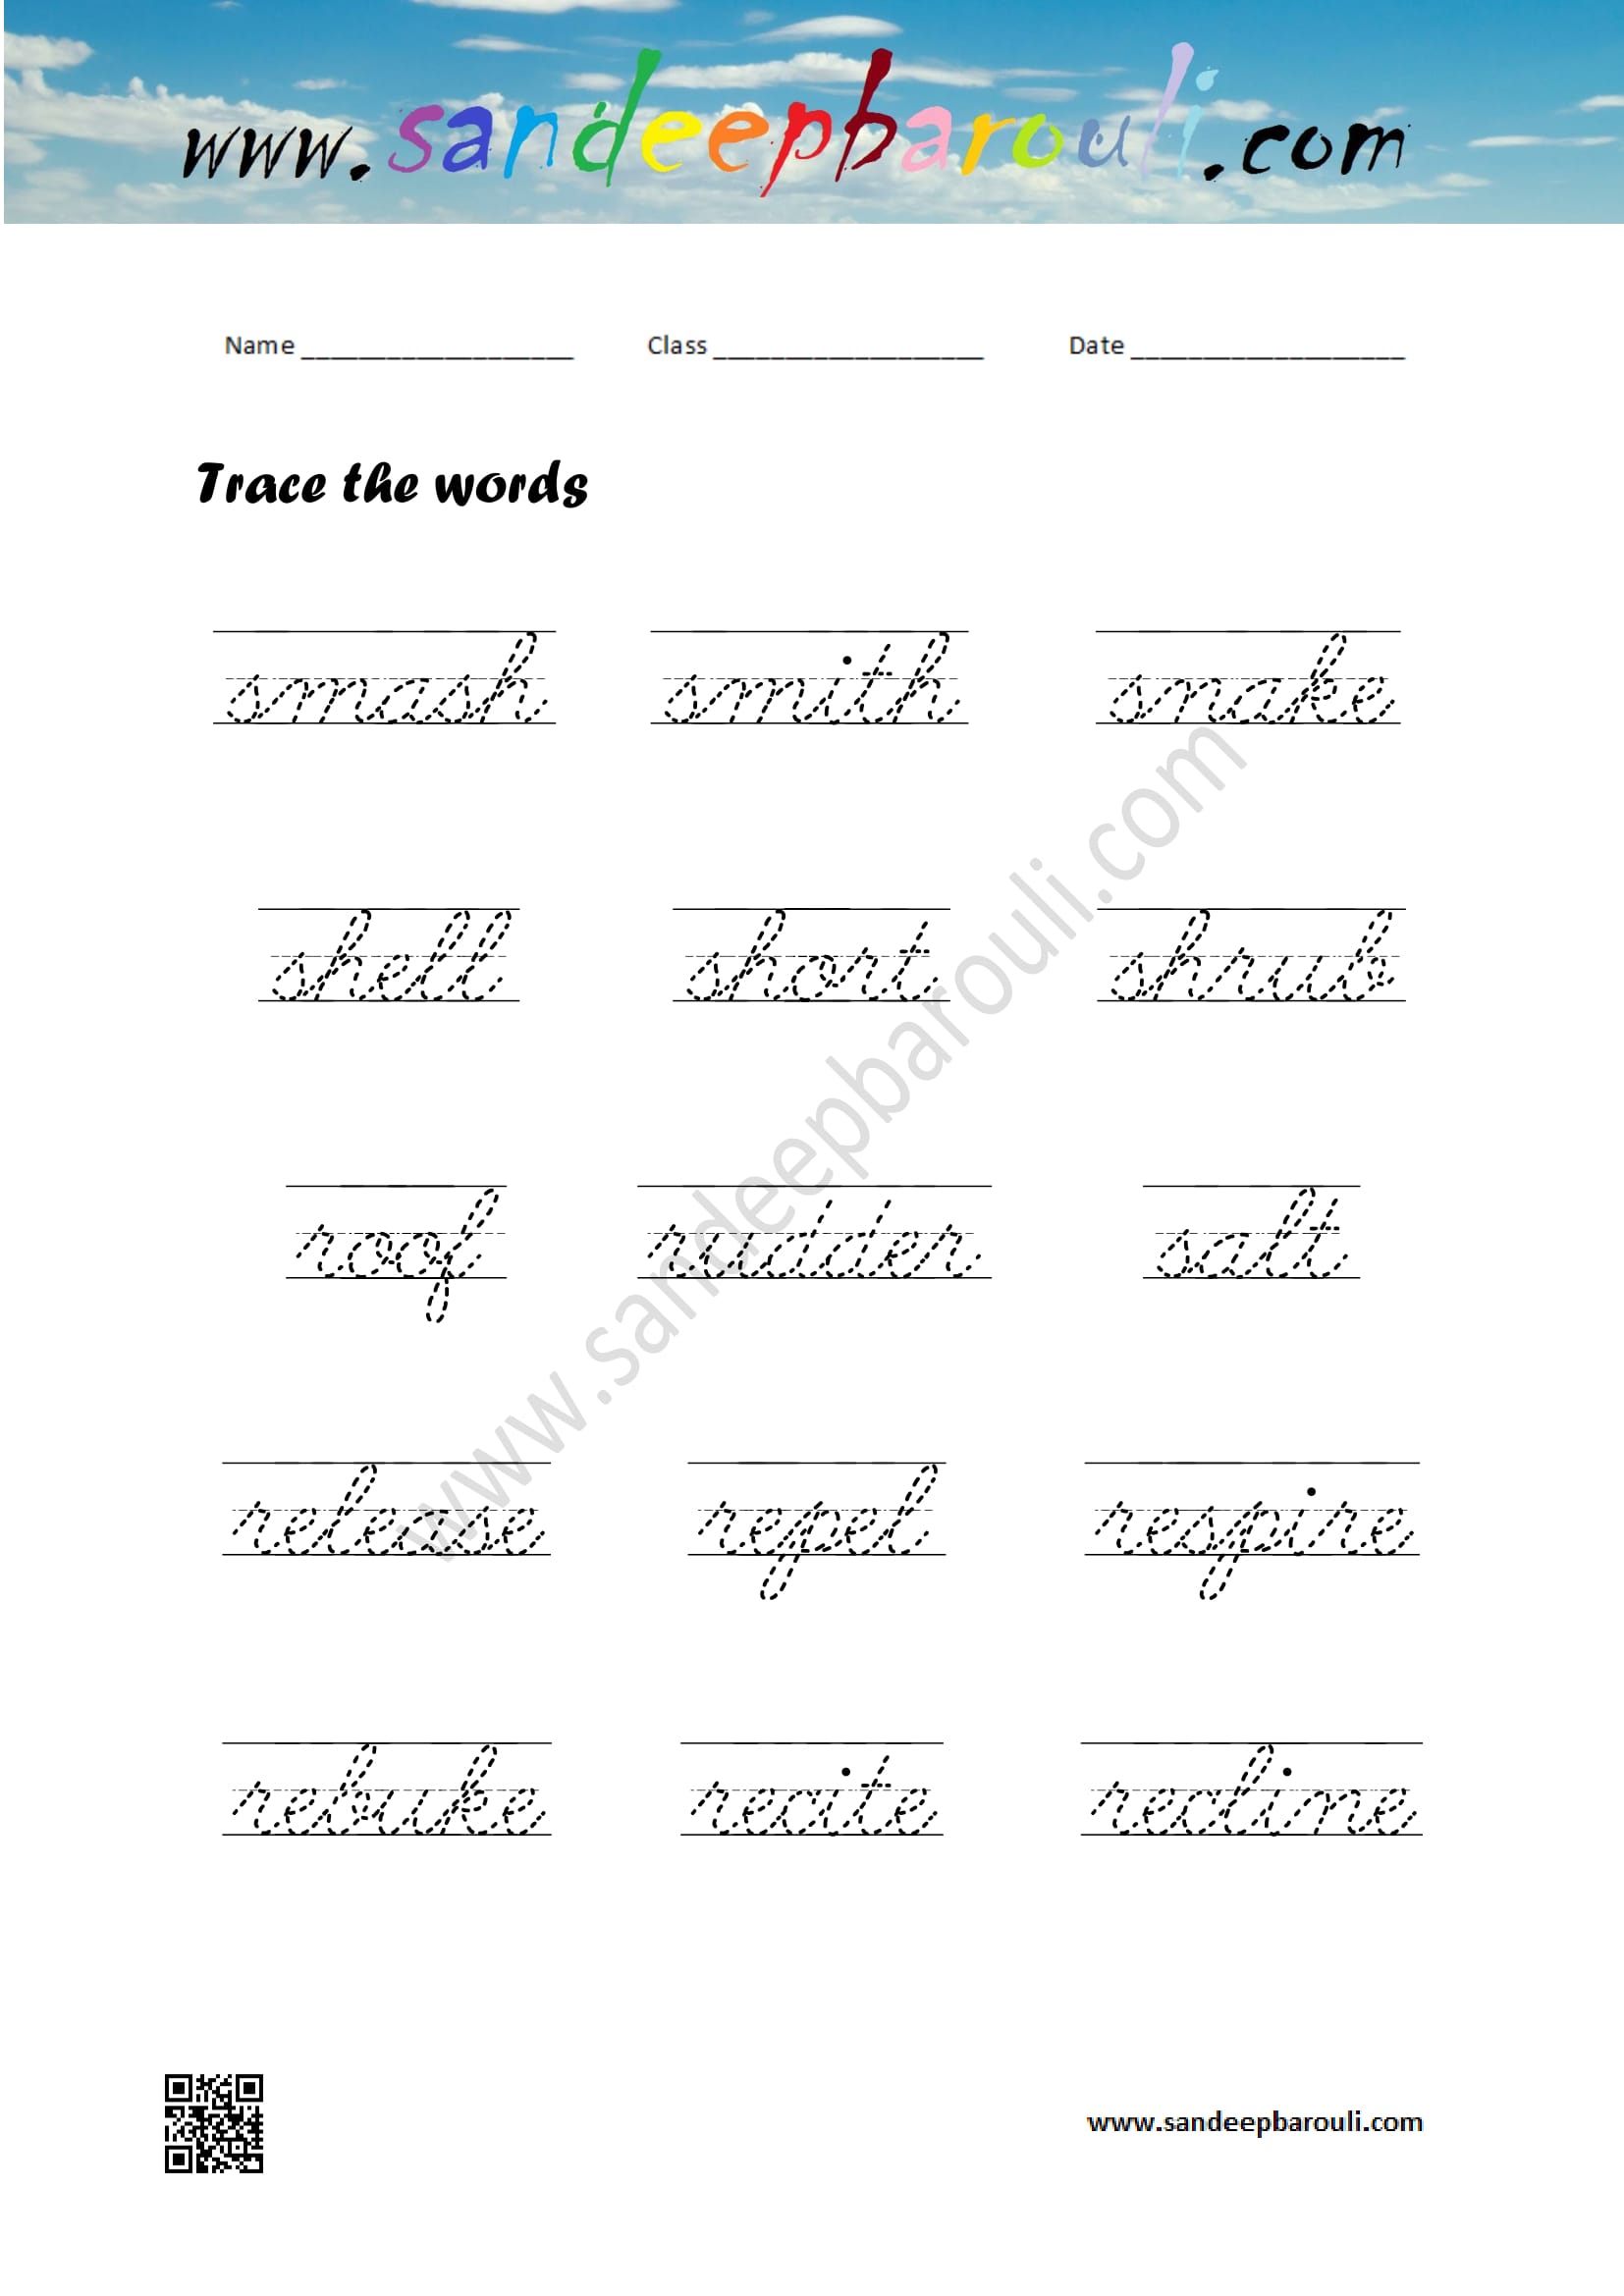 Cursive Writing Worksheet – Trace the words (53)